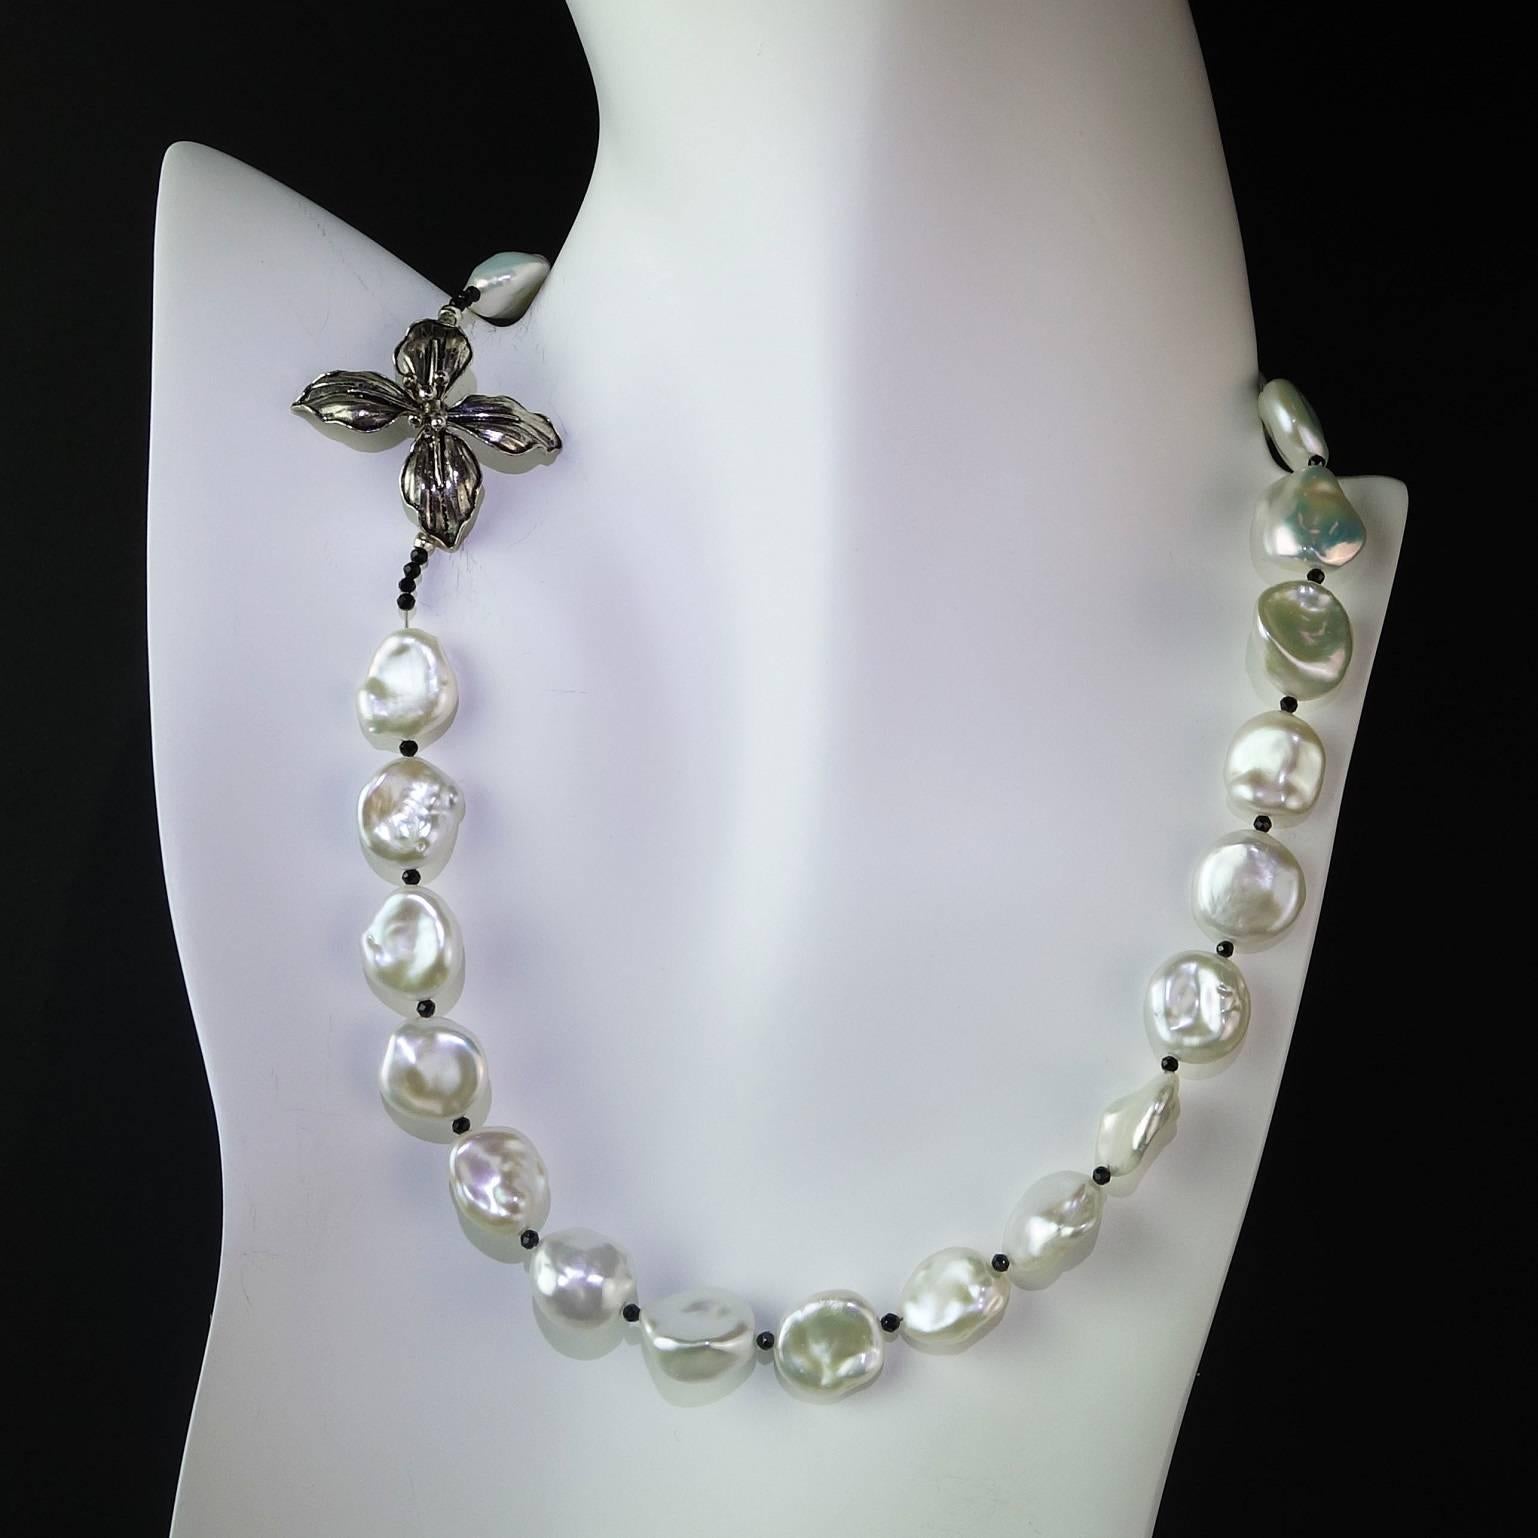 Delicate Choker Necklace of White Iridescent Freshwater Pearls accented with sparkling faceted Black Spinel and finished with a Turkish Sterling Silver Flower Clasp.  This 17 inch necklace is softly glowing and perfect for all occasions. The pearls